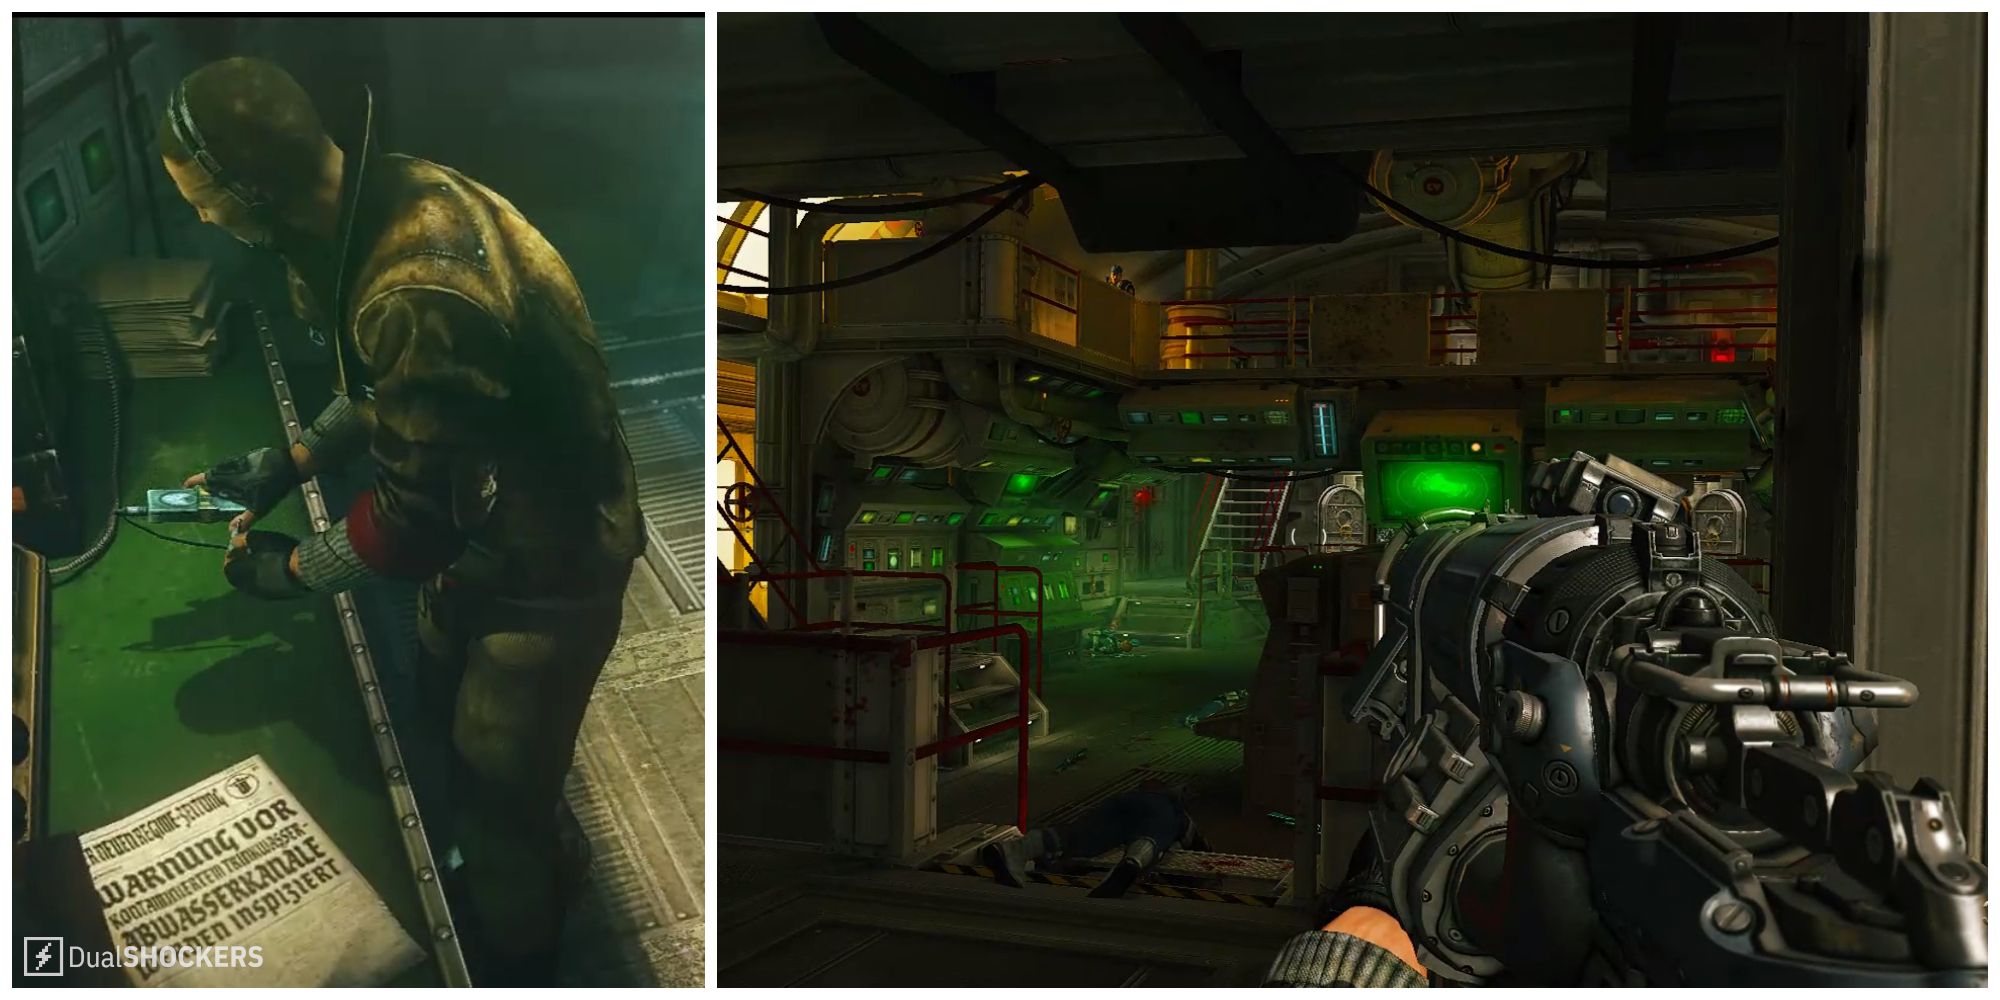 Split image of Blazkowicz on the left in a cutscene and gameplay inside the radio room of the U-Boat in Wolfenstein: The New Order.